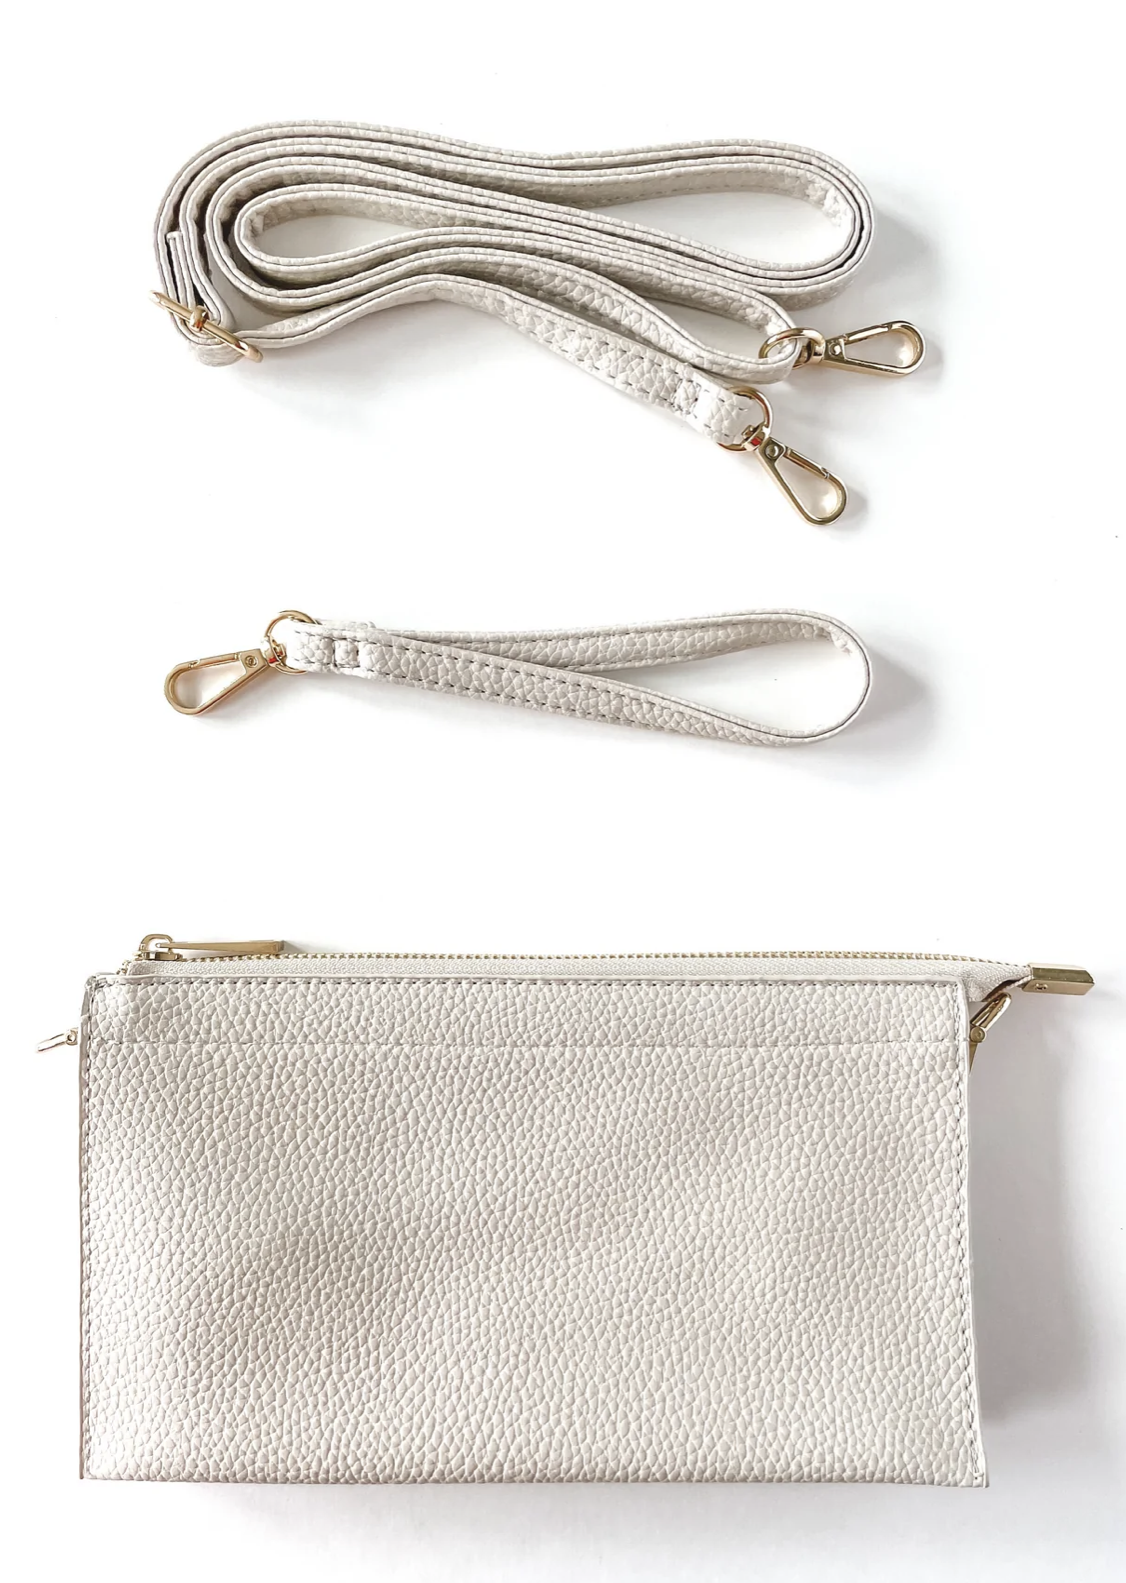 The Abby Crossbody With 3 Straps